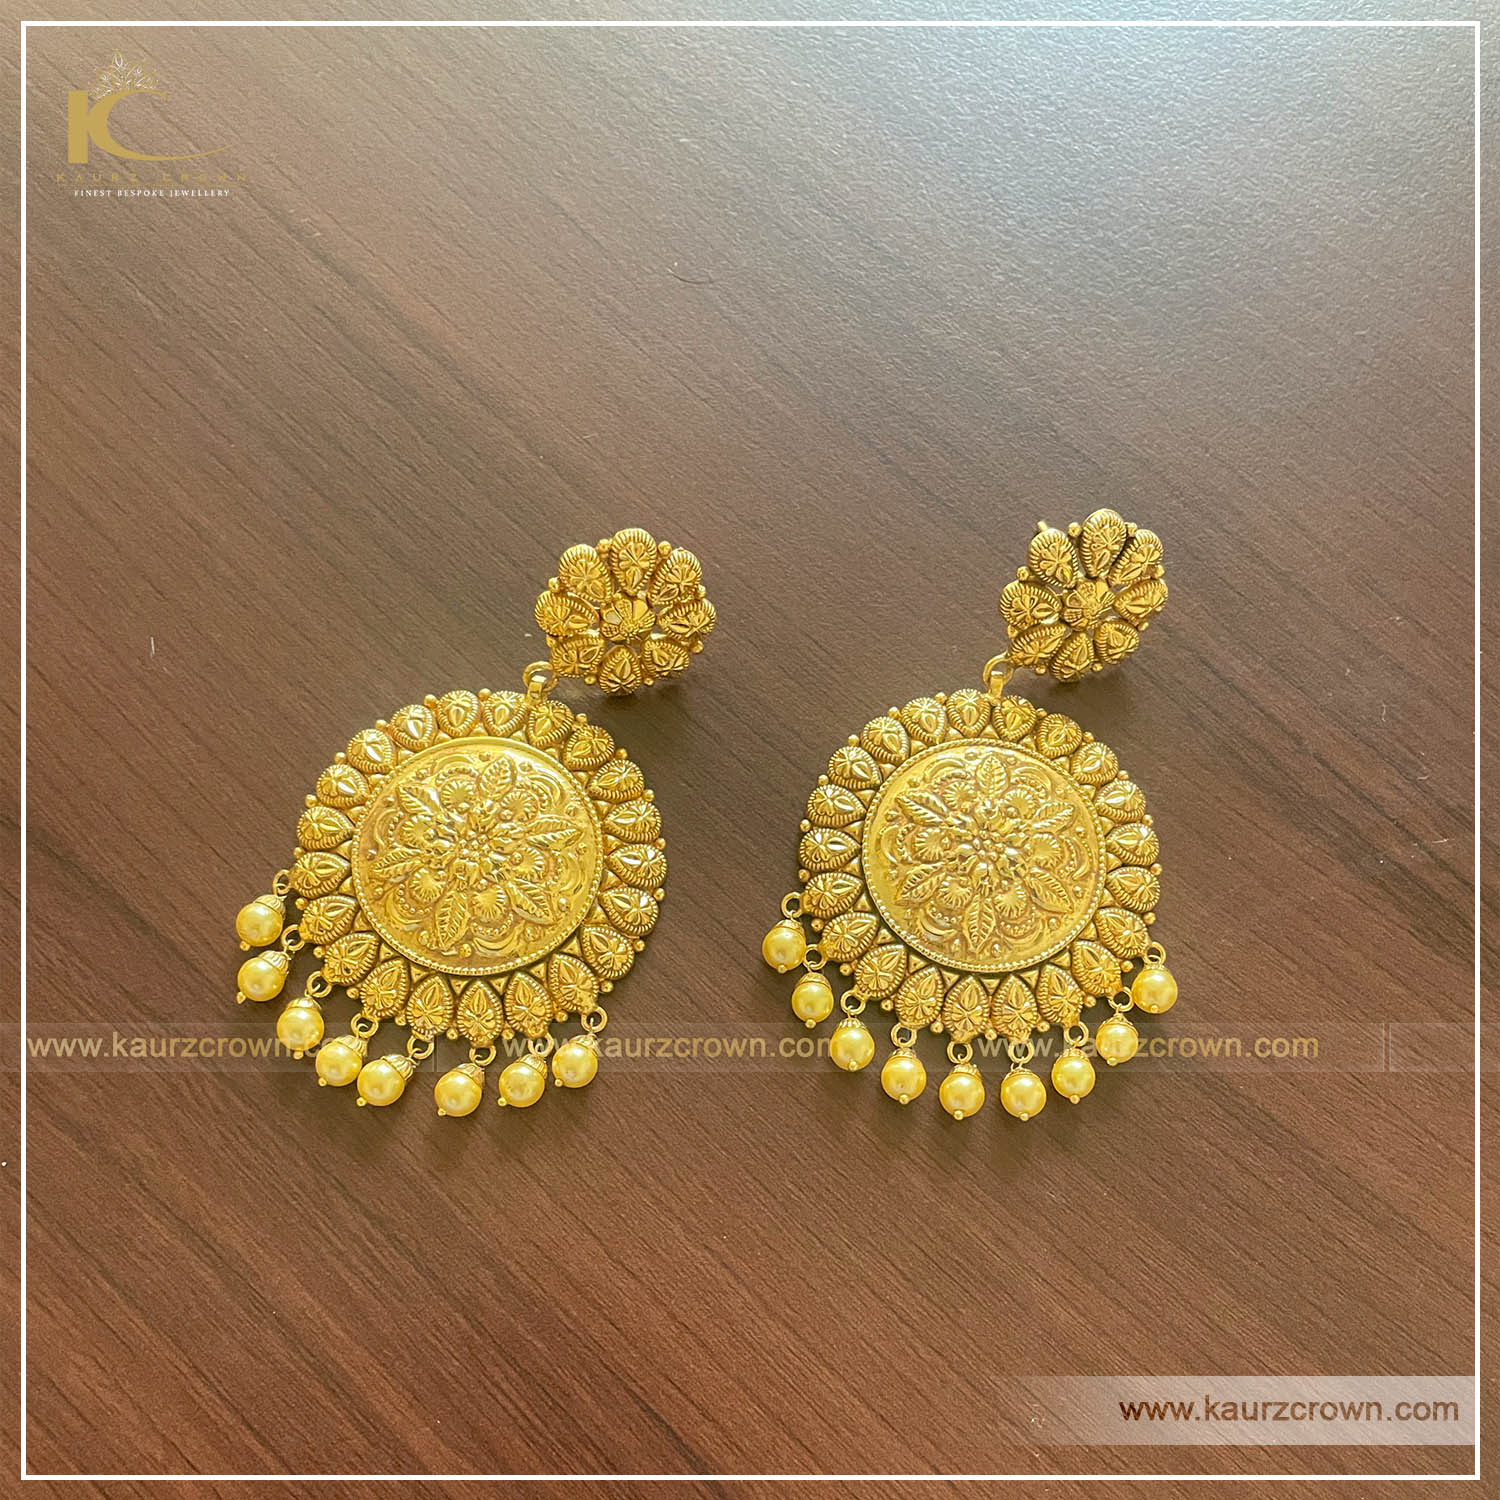 Dilbara Traditional Antique Gold Plated Earrings , dilbara , gold plated , earrings , tikka set , kaurz crown , jewellery